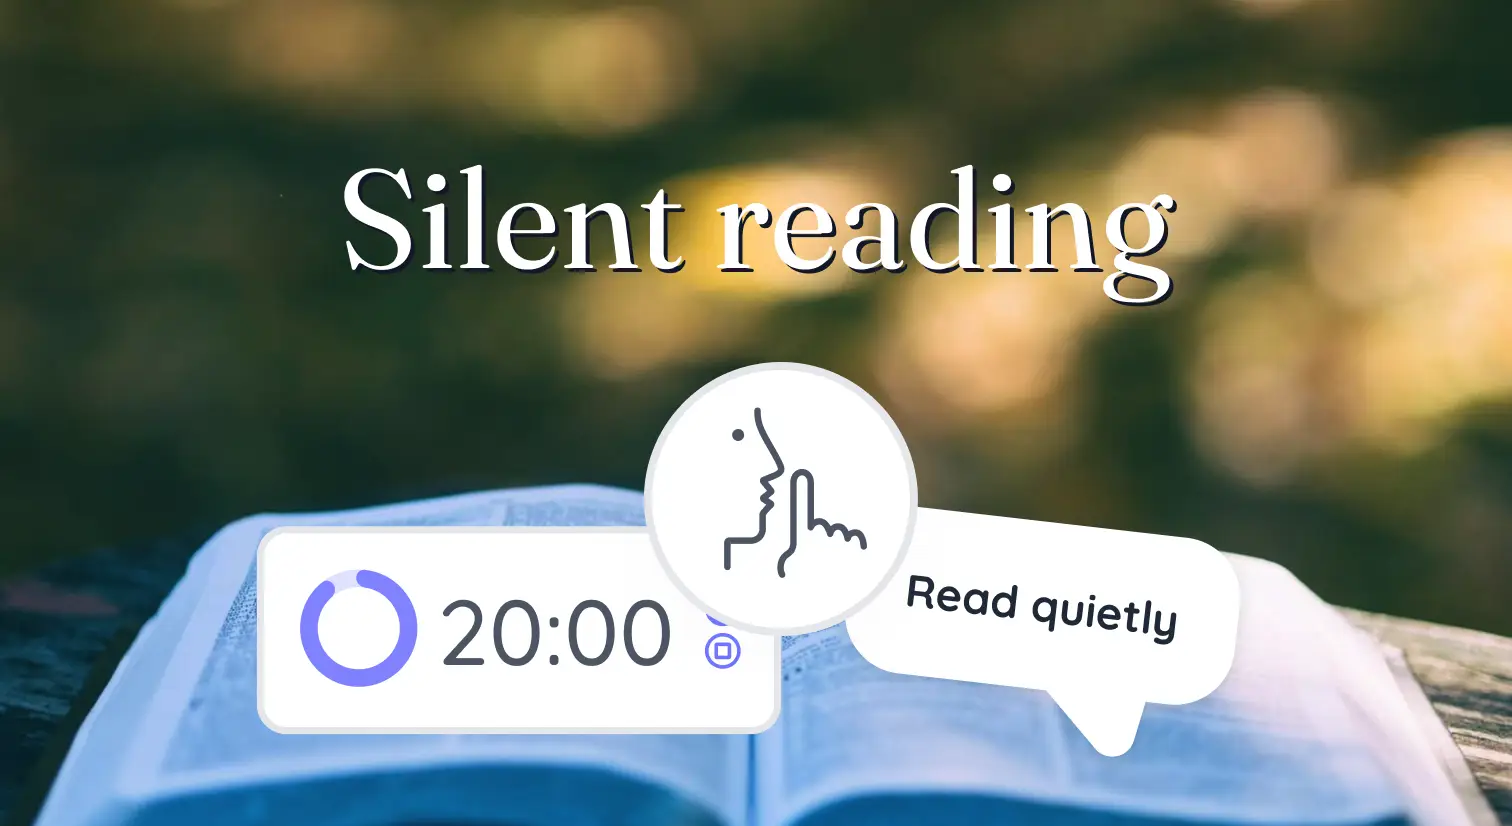 Enjoy a bit of Sustained Silent Reading (SSR) yourself.